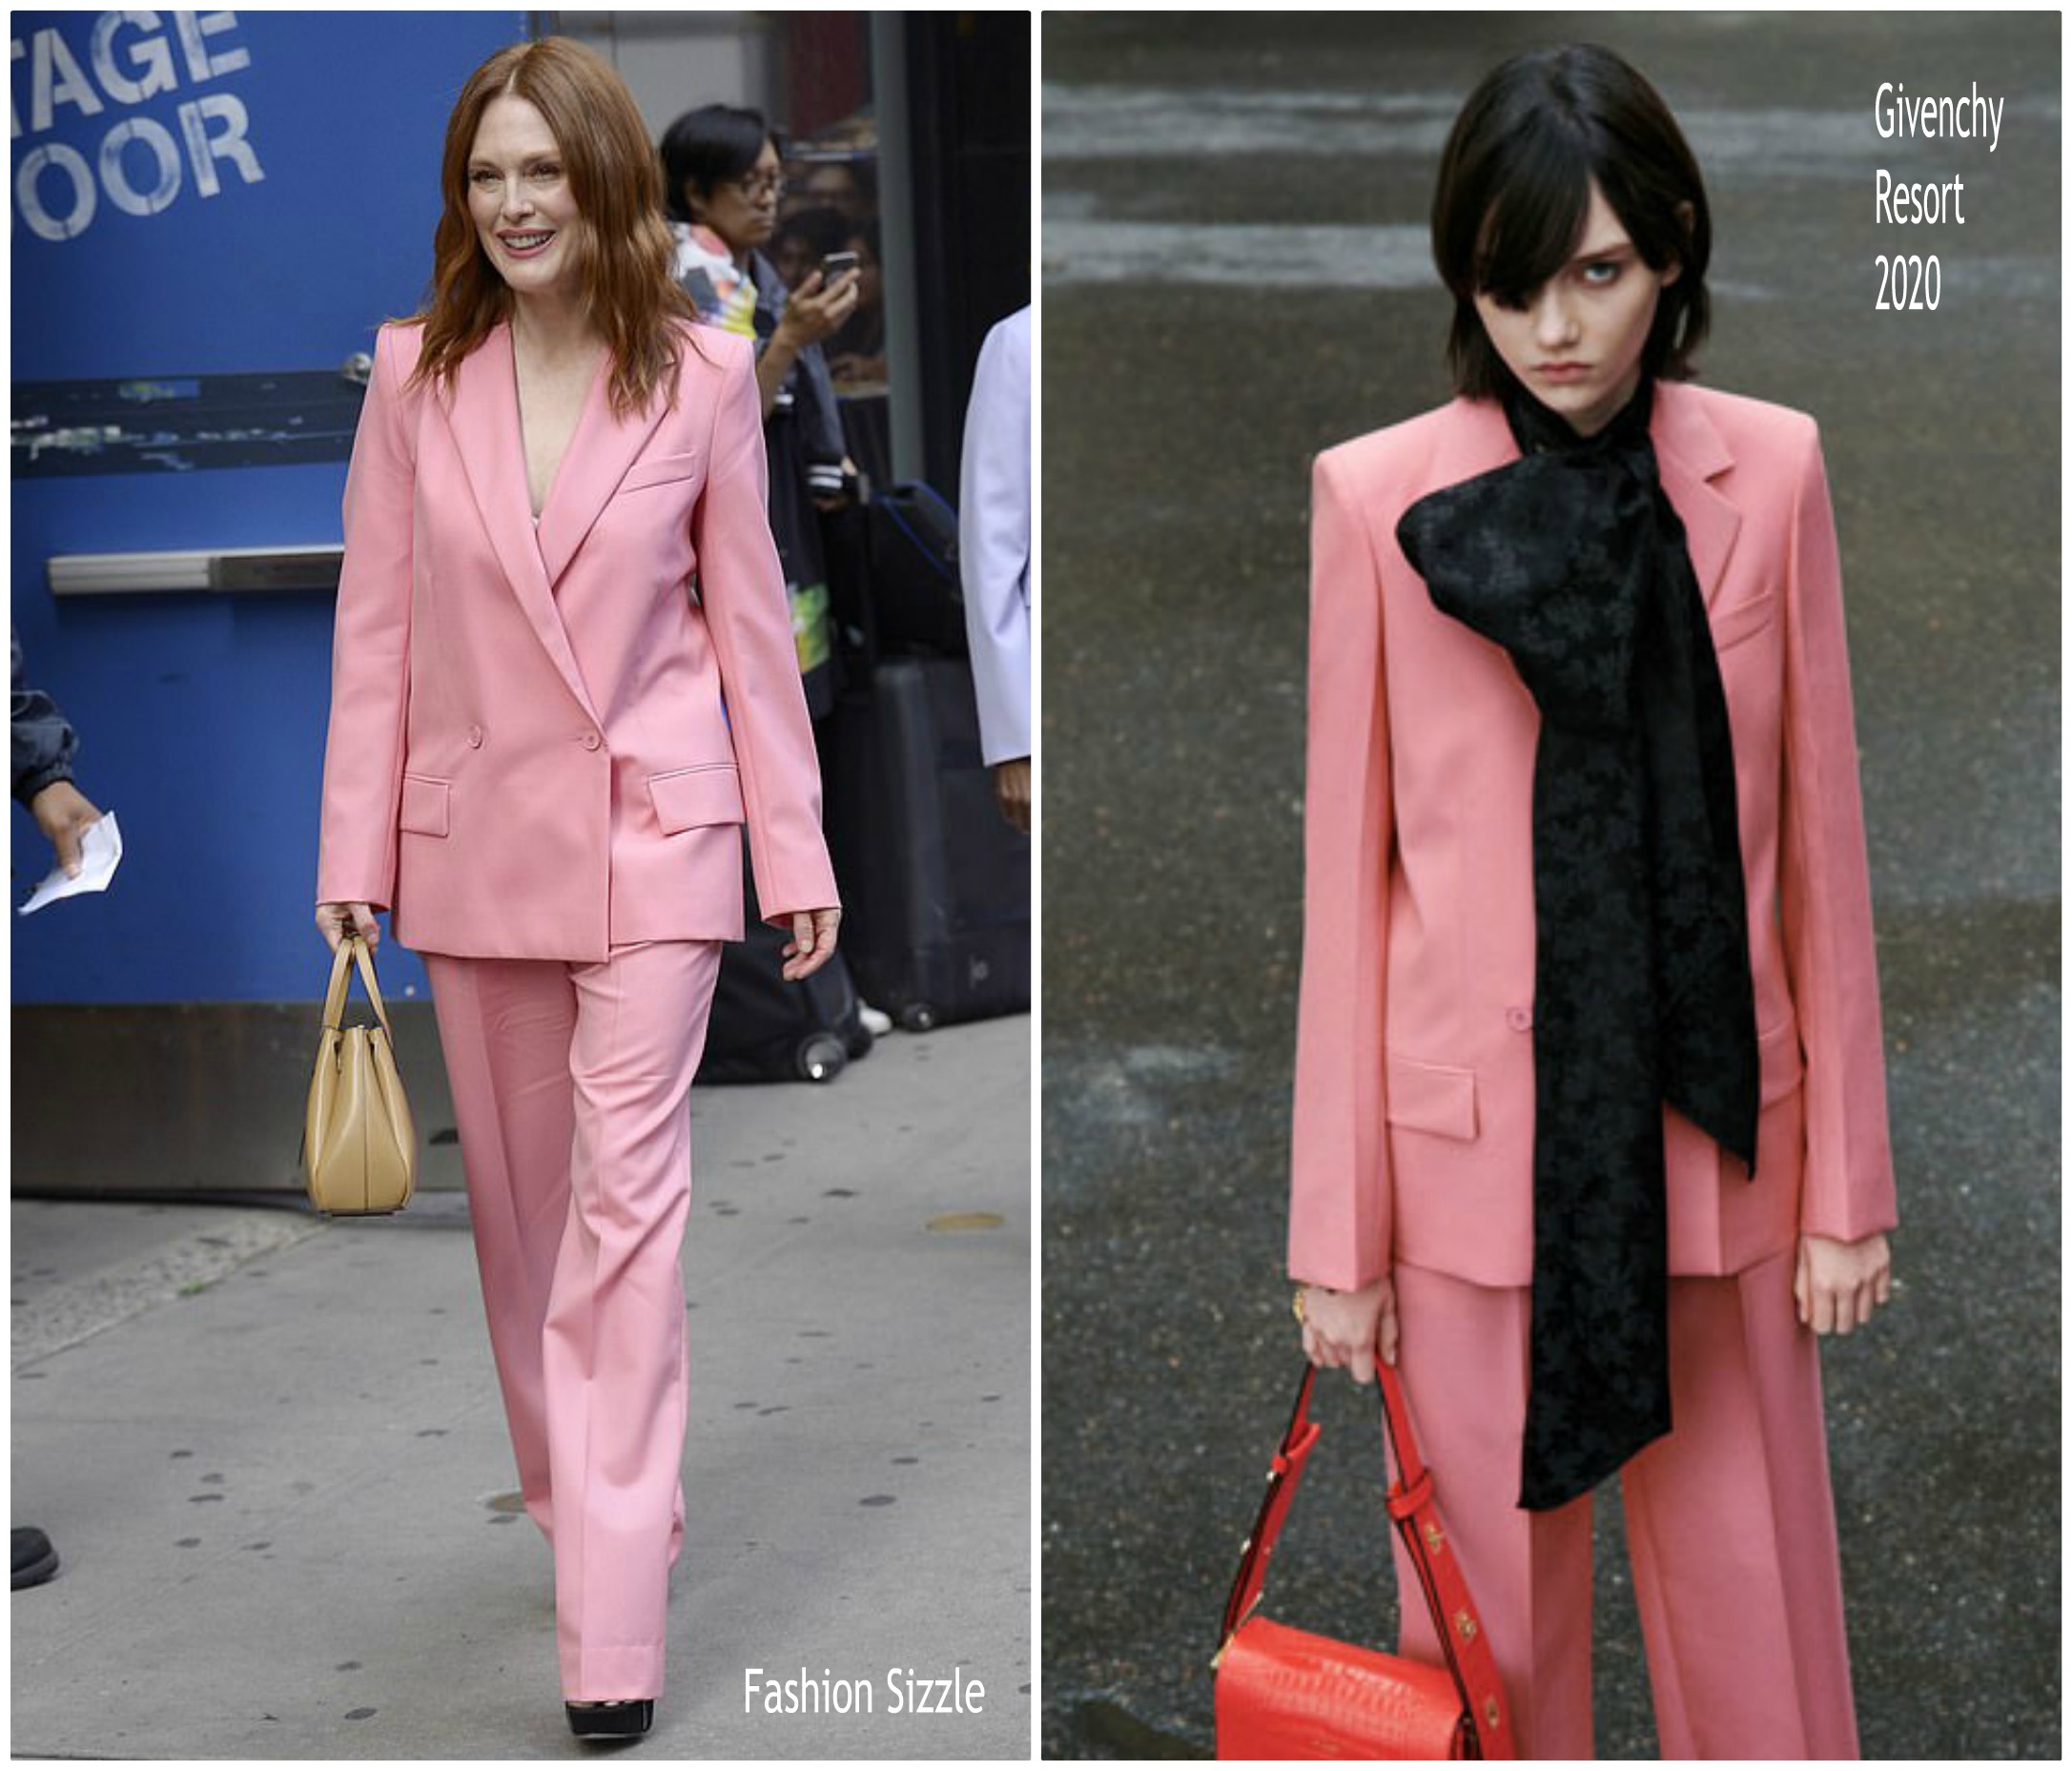 julianne-moore-in-givenchy-suit-good-morning-america